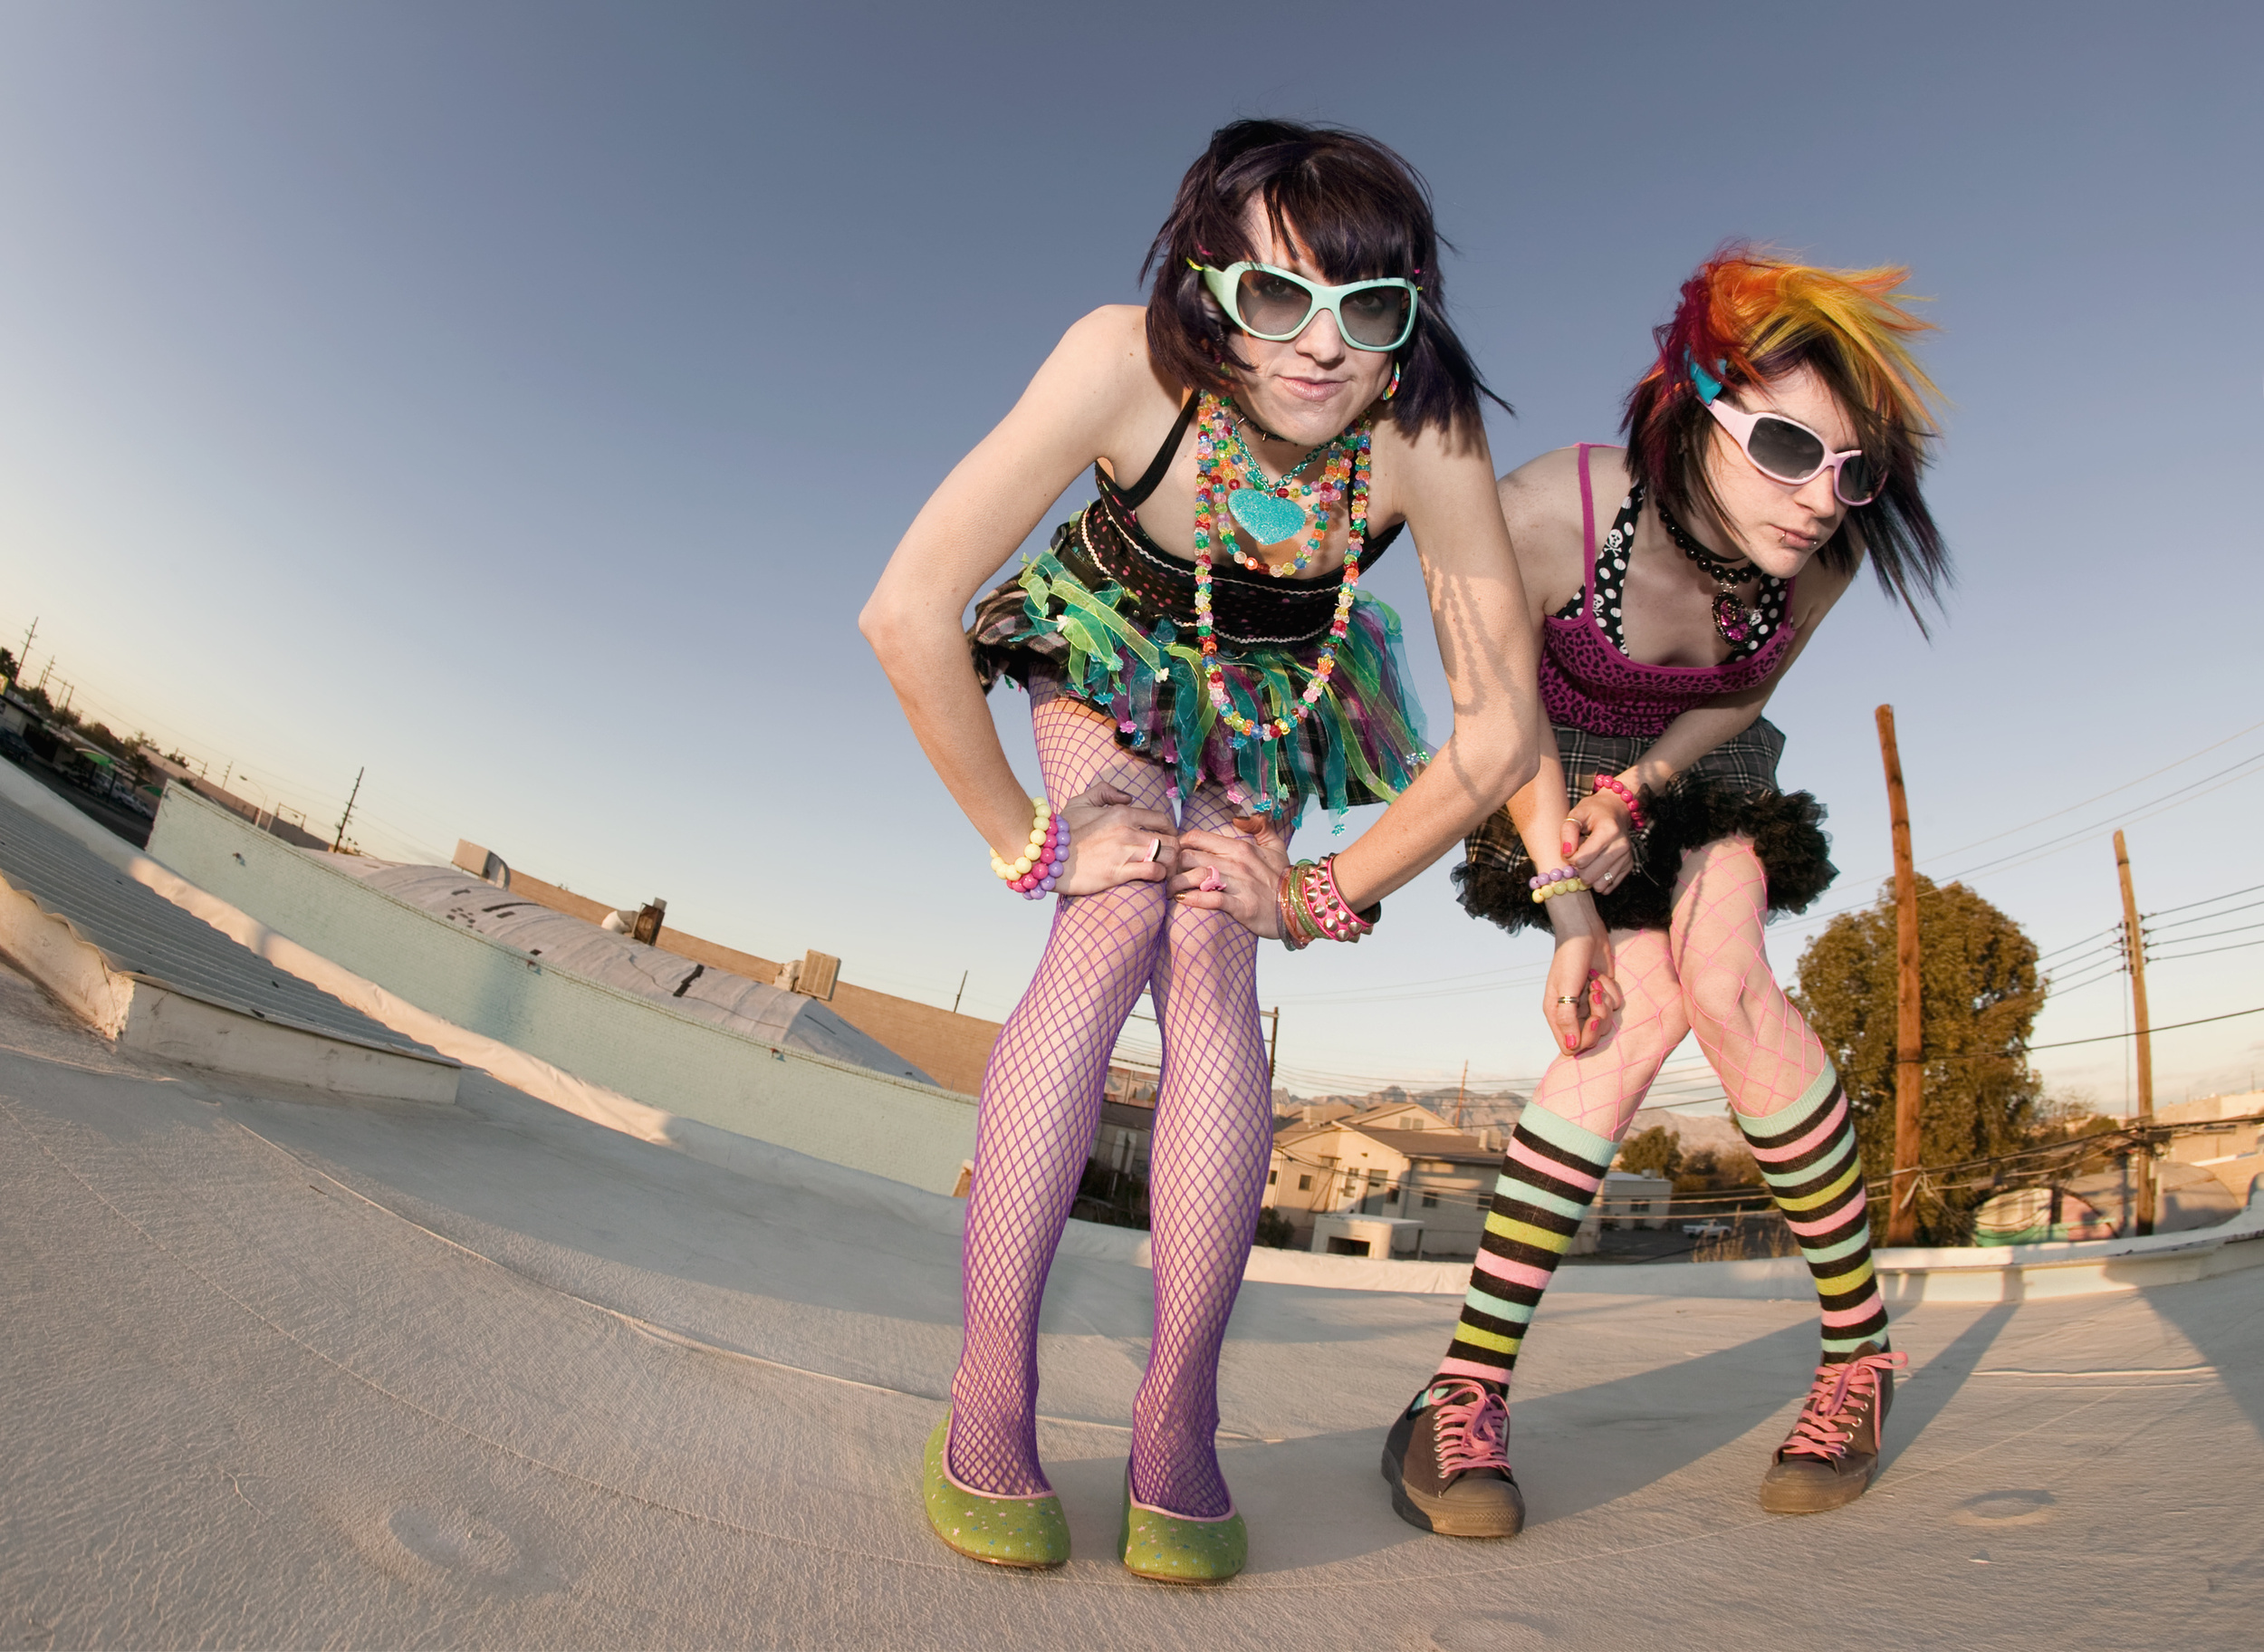 <p>If the Warped Tour was your idea of fun growing up, have an emo night bachelorette theme. Play all the best emo hits of the 2000s, sport black-chipped nail polish, and make sure everyone has the smokiest eyes possible. If you can find an emo bar, make sure to stop for at least one drink. </p><p><a href='https://www.msn.com/en-us/community/channel/vid-cj9pqbr0vn9in2b6ddcd8sfgpfq6x6utp44fssrv6mc2gtybw0us'>Follow us on MSN to see more of our exclusive lifestyle content.</a></p>